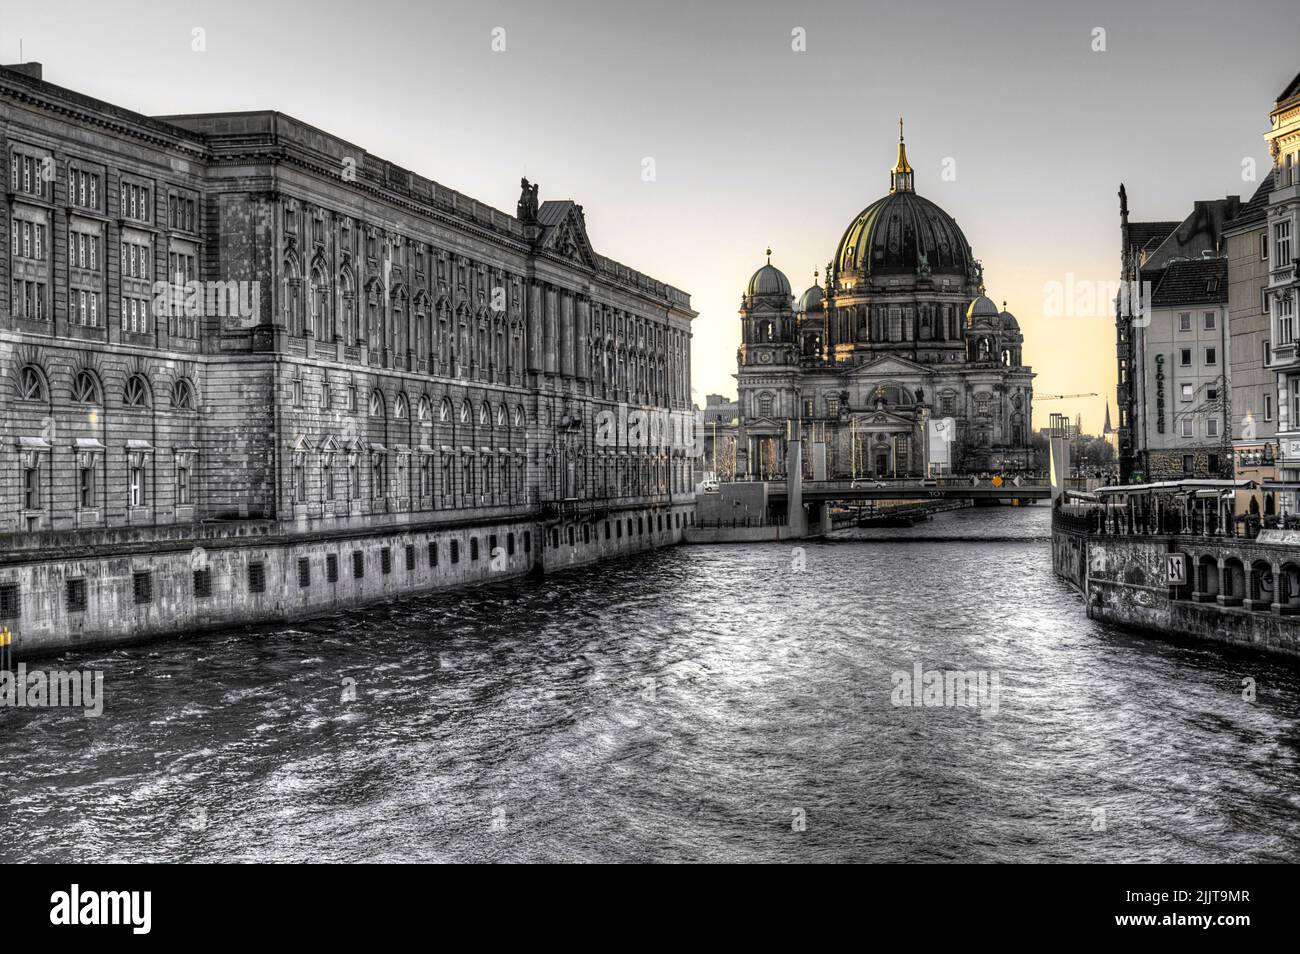 A dramatic view of the Berlin Cathedral in Mitte district, beside the river Spree, Berlin, Germany Stock Photo